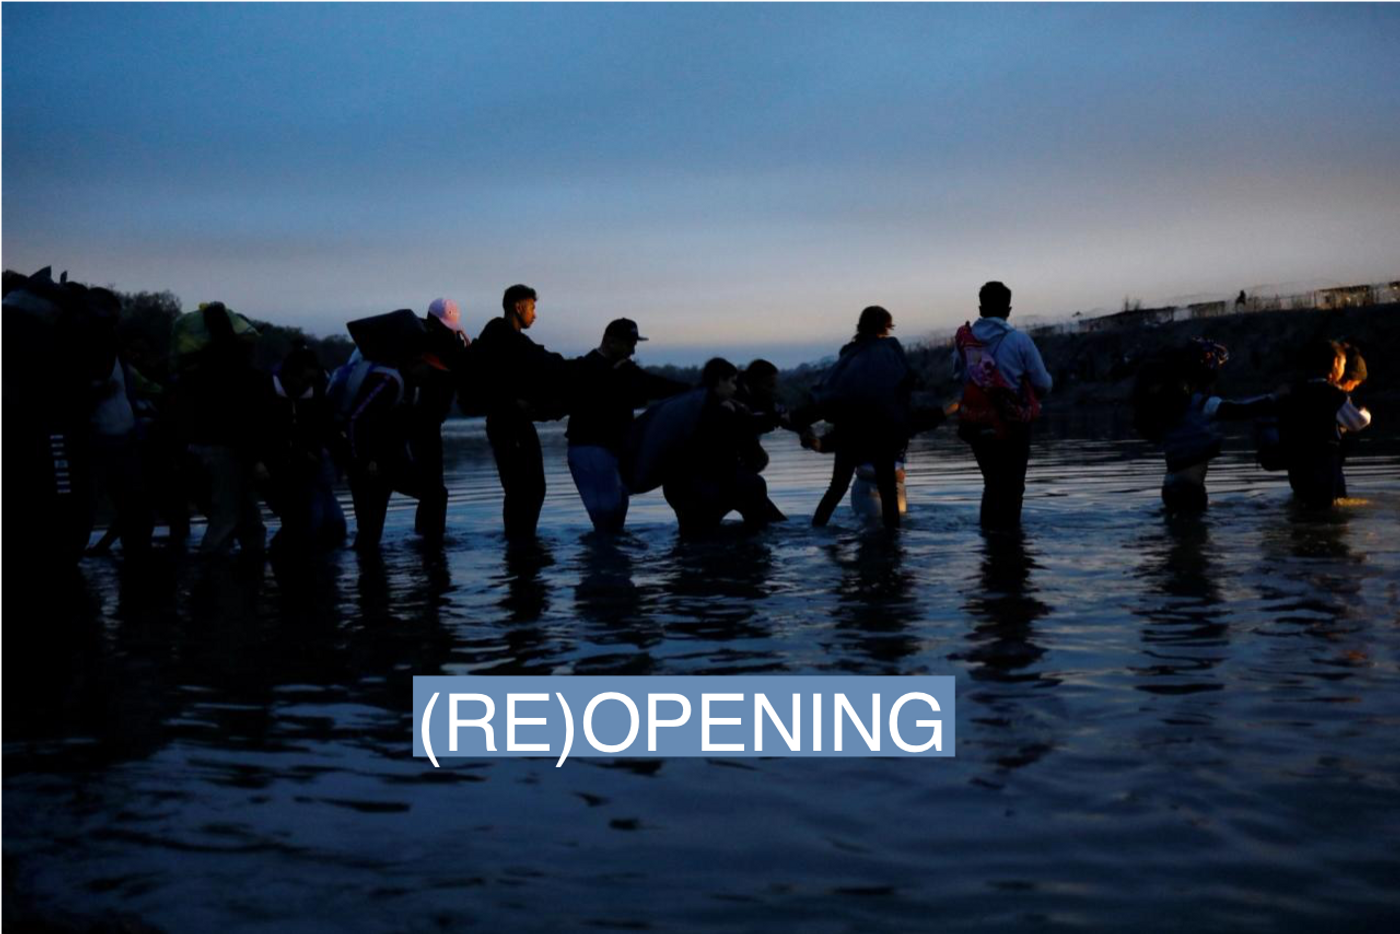 Migrants cross the Rio Bravo river at the border between the United States and Mexico, with the intention of turning themselves in to the U.S. Border Patrol agents to request asylum, as seen from Piedras Negras, Coahuila, Mexico on Dec. 21.